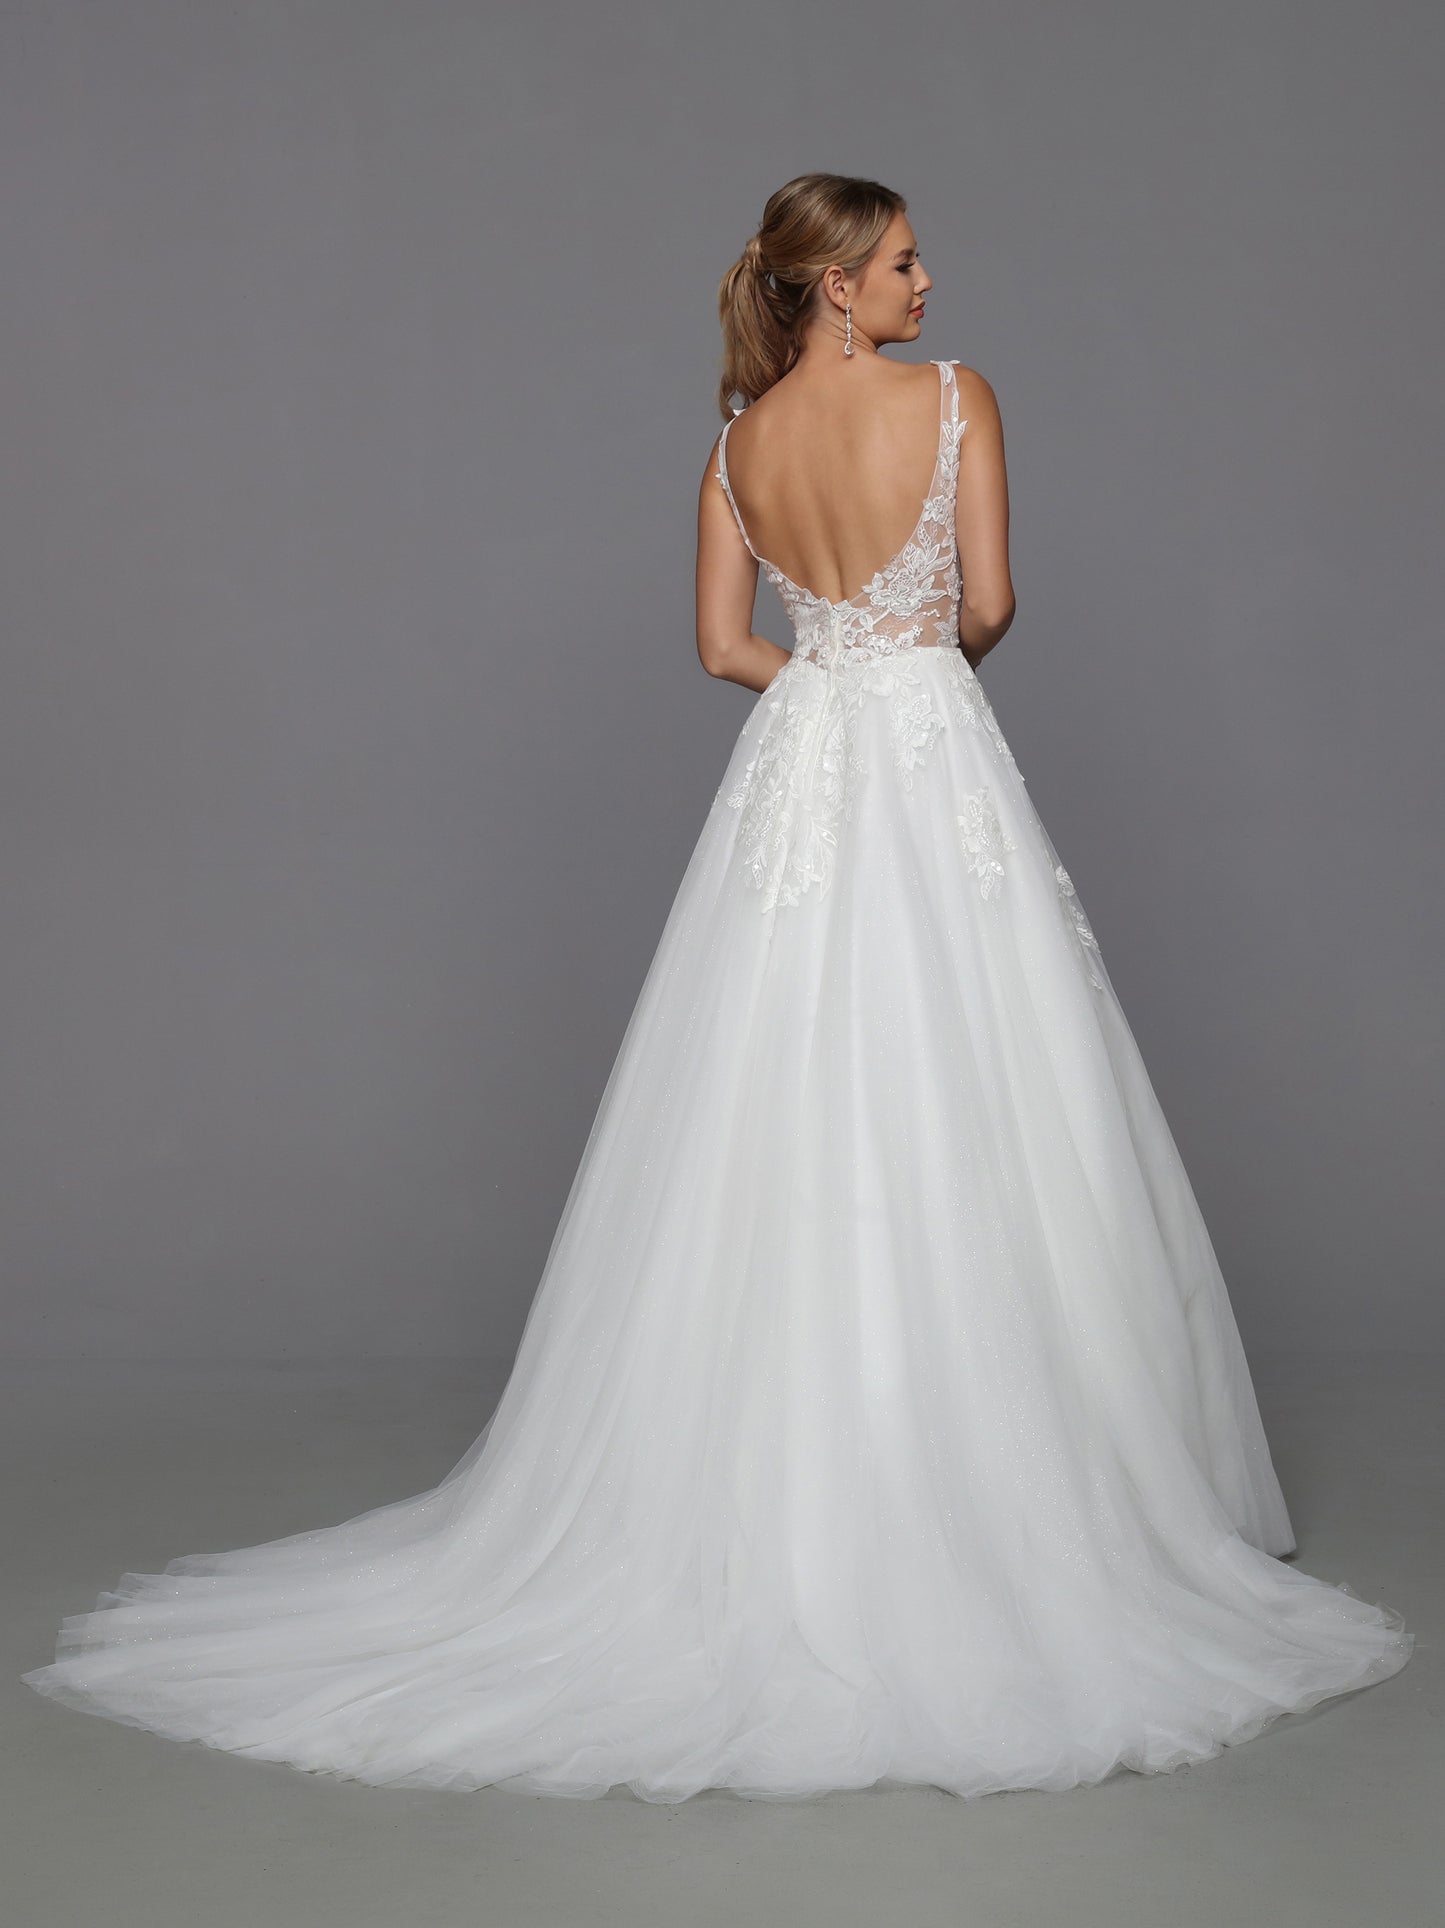 DaVinci Bridal 50769 A-Line Ballgown Illusion High Neck Long Sleeve Floral Lace Train Wedding Gown. Convertible dresses are always on-trend, like this lush ball gown with sheer full-length sleeves highlighted with rich lace applique. The alluring low scoop back is balanced by the modest bateau neckline.